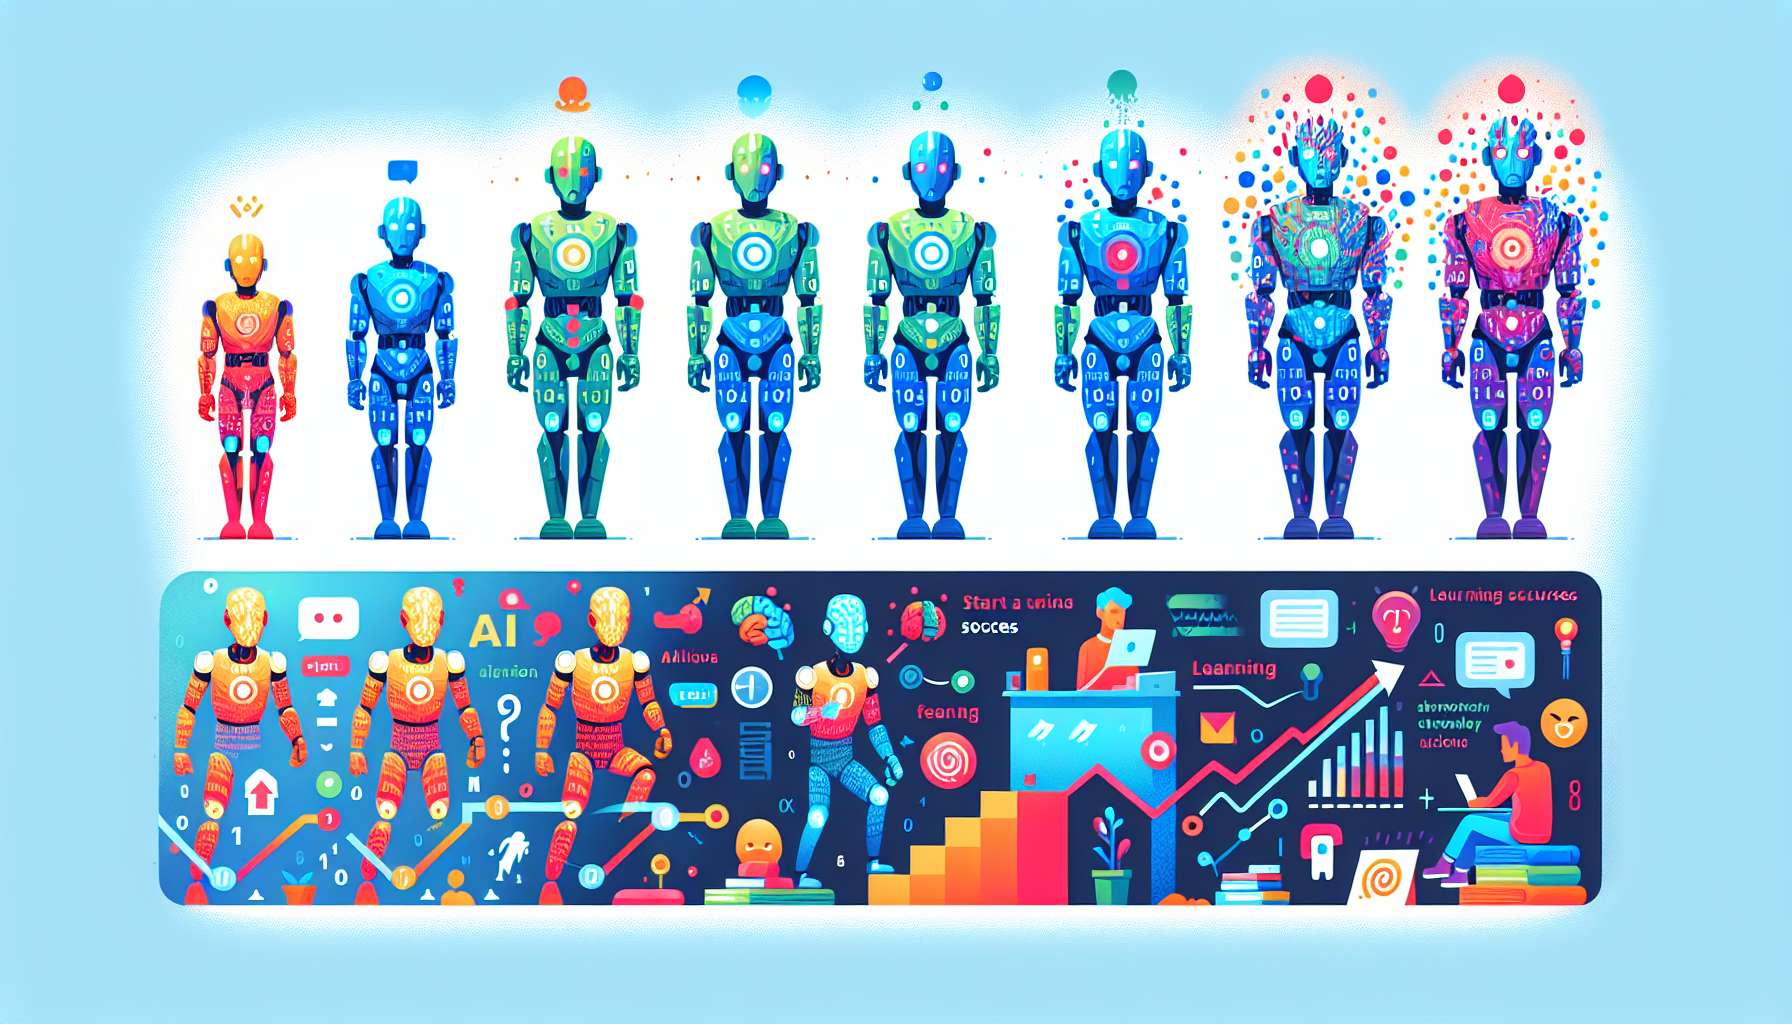 Create an illustration depicting a digital AI character evolving and developing over time in a colorful and modern style. Showcase different stages of its growth - emerging from a basic binary digit form, slowly gaining complexity, interacting with various digital environments, starting to show signs of emotions, learning from successes and failures until finally reaching a peak where it possesses a rich, well-developed character. Use vibrant colors to represent its progression. All aspects of the image must strictly be in visual symbols and signs, no textual content should be present.